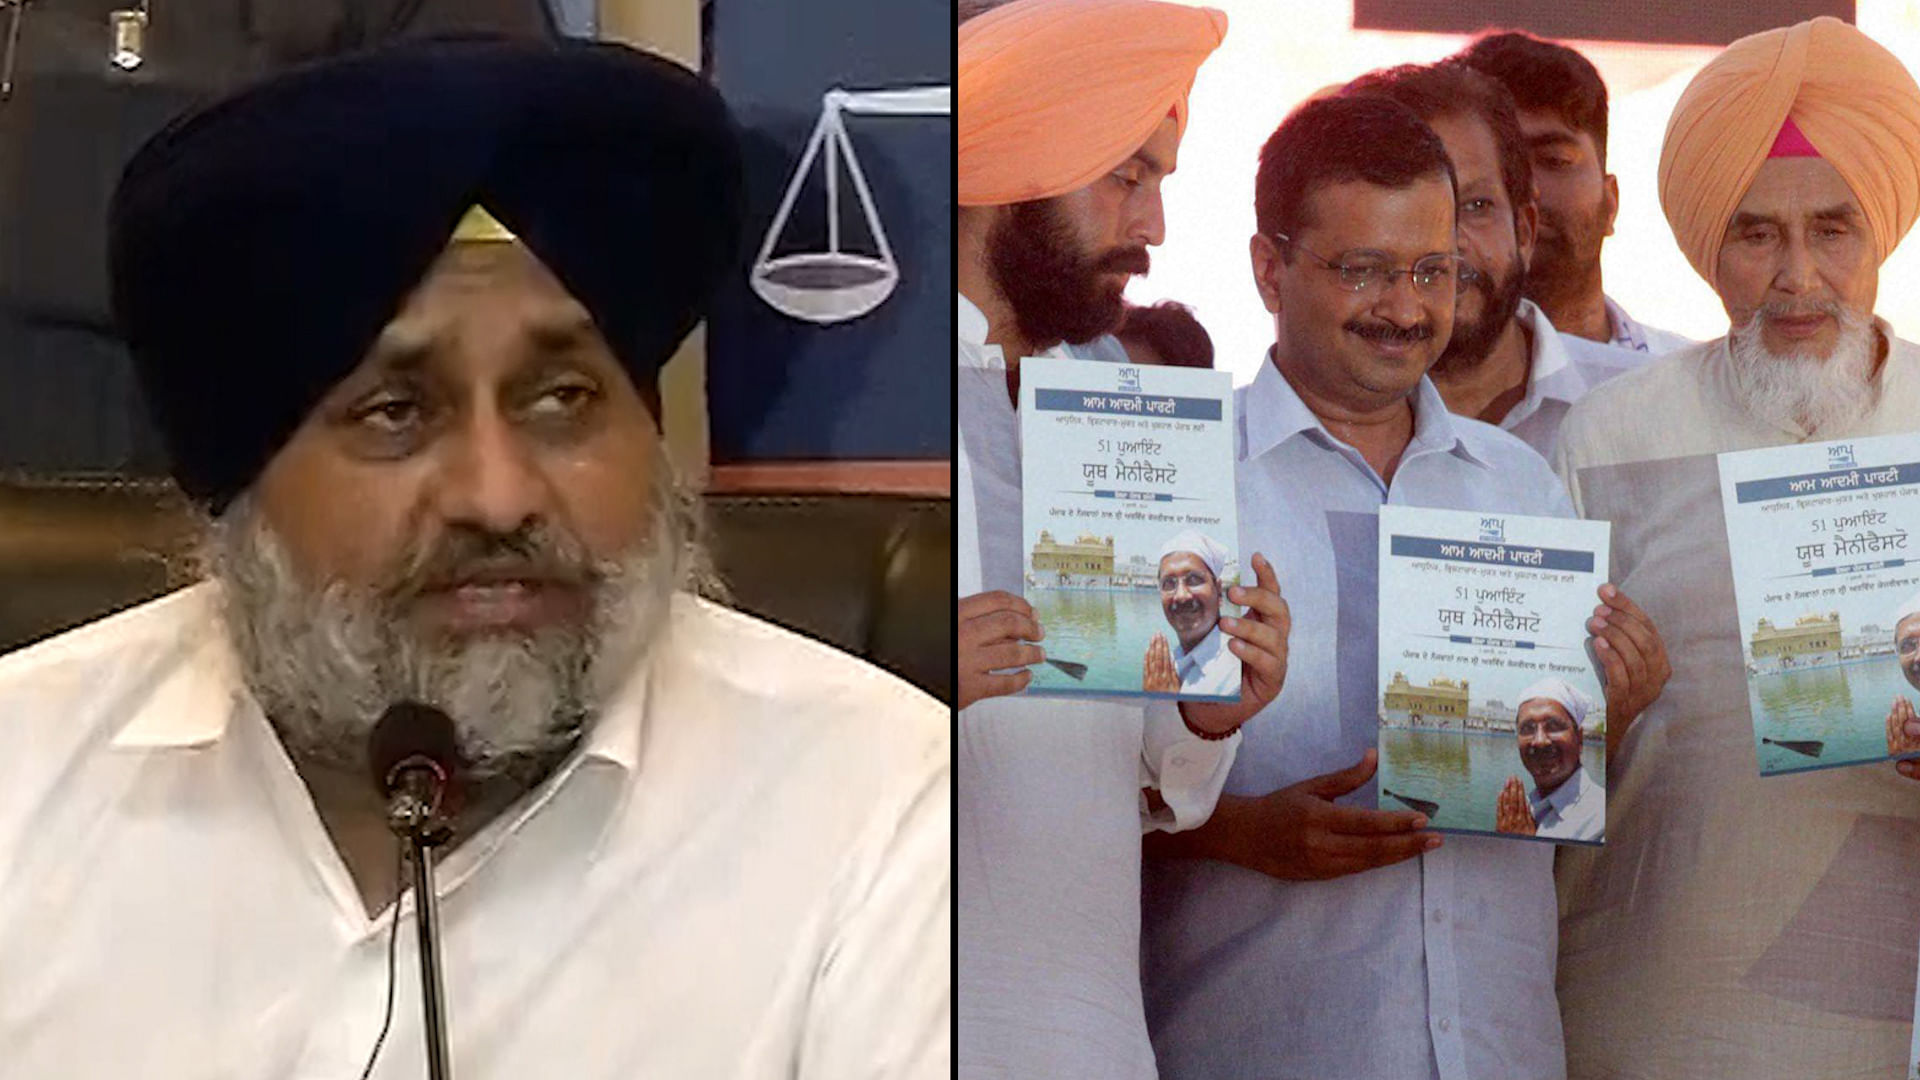 Punjab’s Deputy Chief Minister Sukhbir Singh Badal (left) has slammed Aam Aadmi Party for hurting Sikh religious sentiments. (Photo: altered by <b>The Quint</b>)